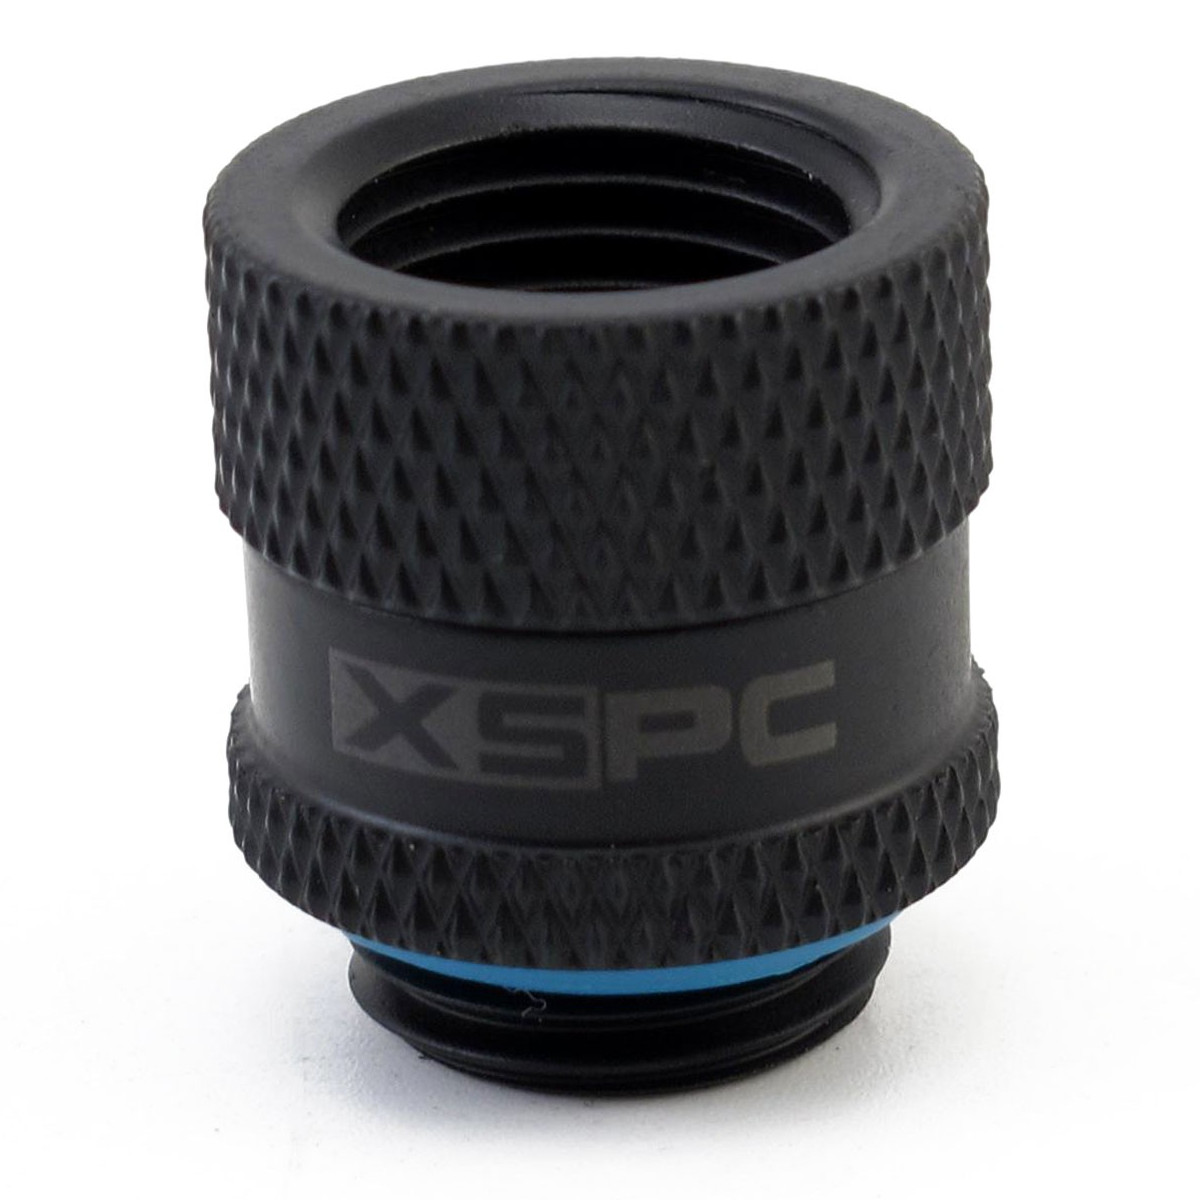 XSPC G1/4" Male to Female Rotary Fitting (Matte Black)